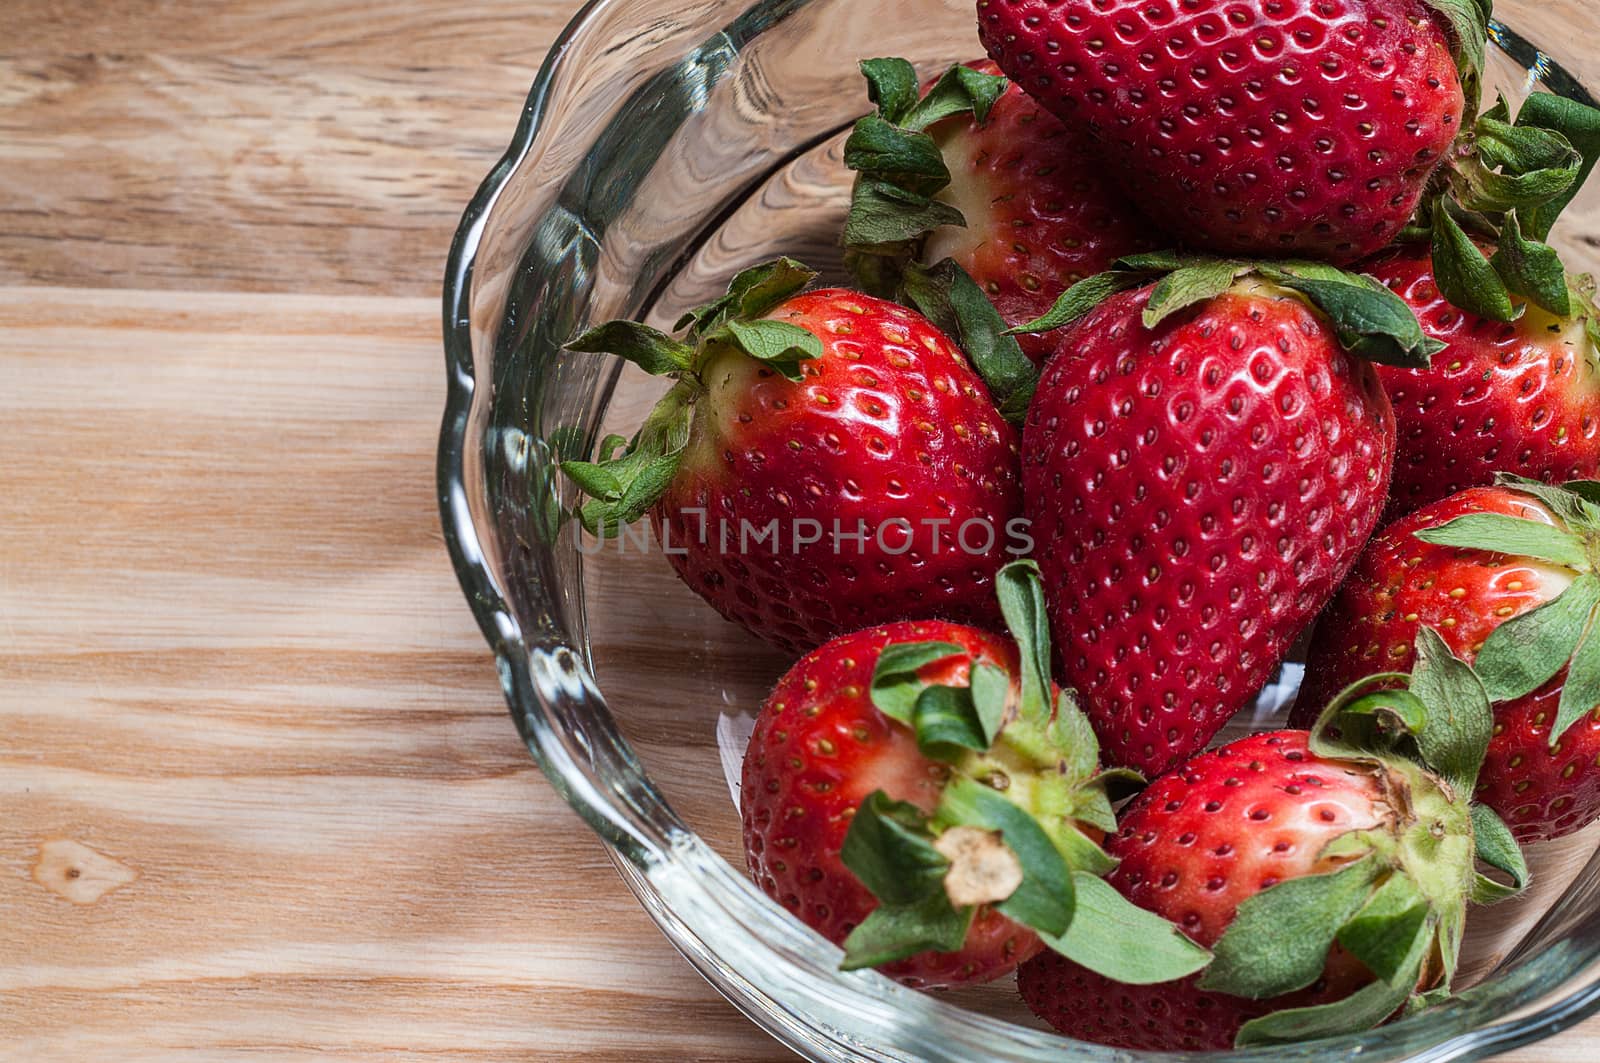 Strawberries in a glass bowl by edcorey